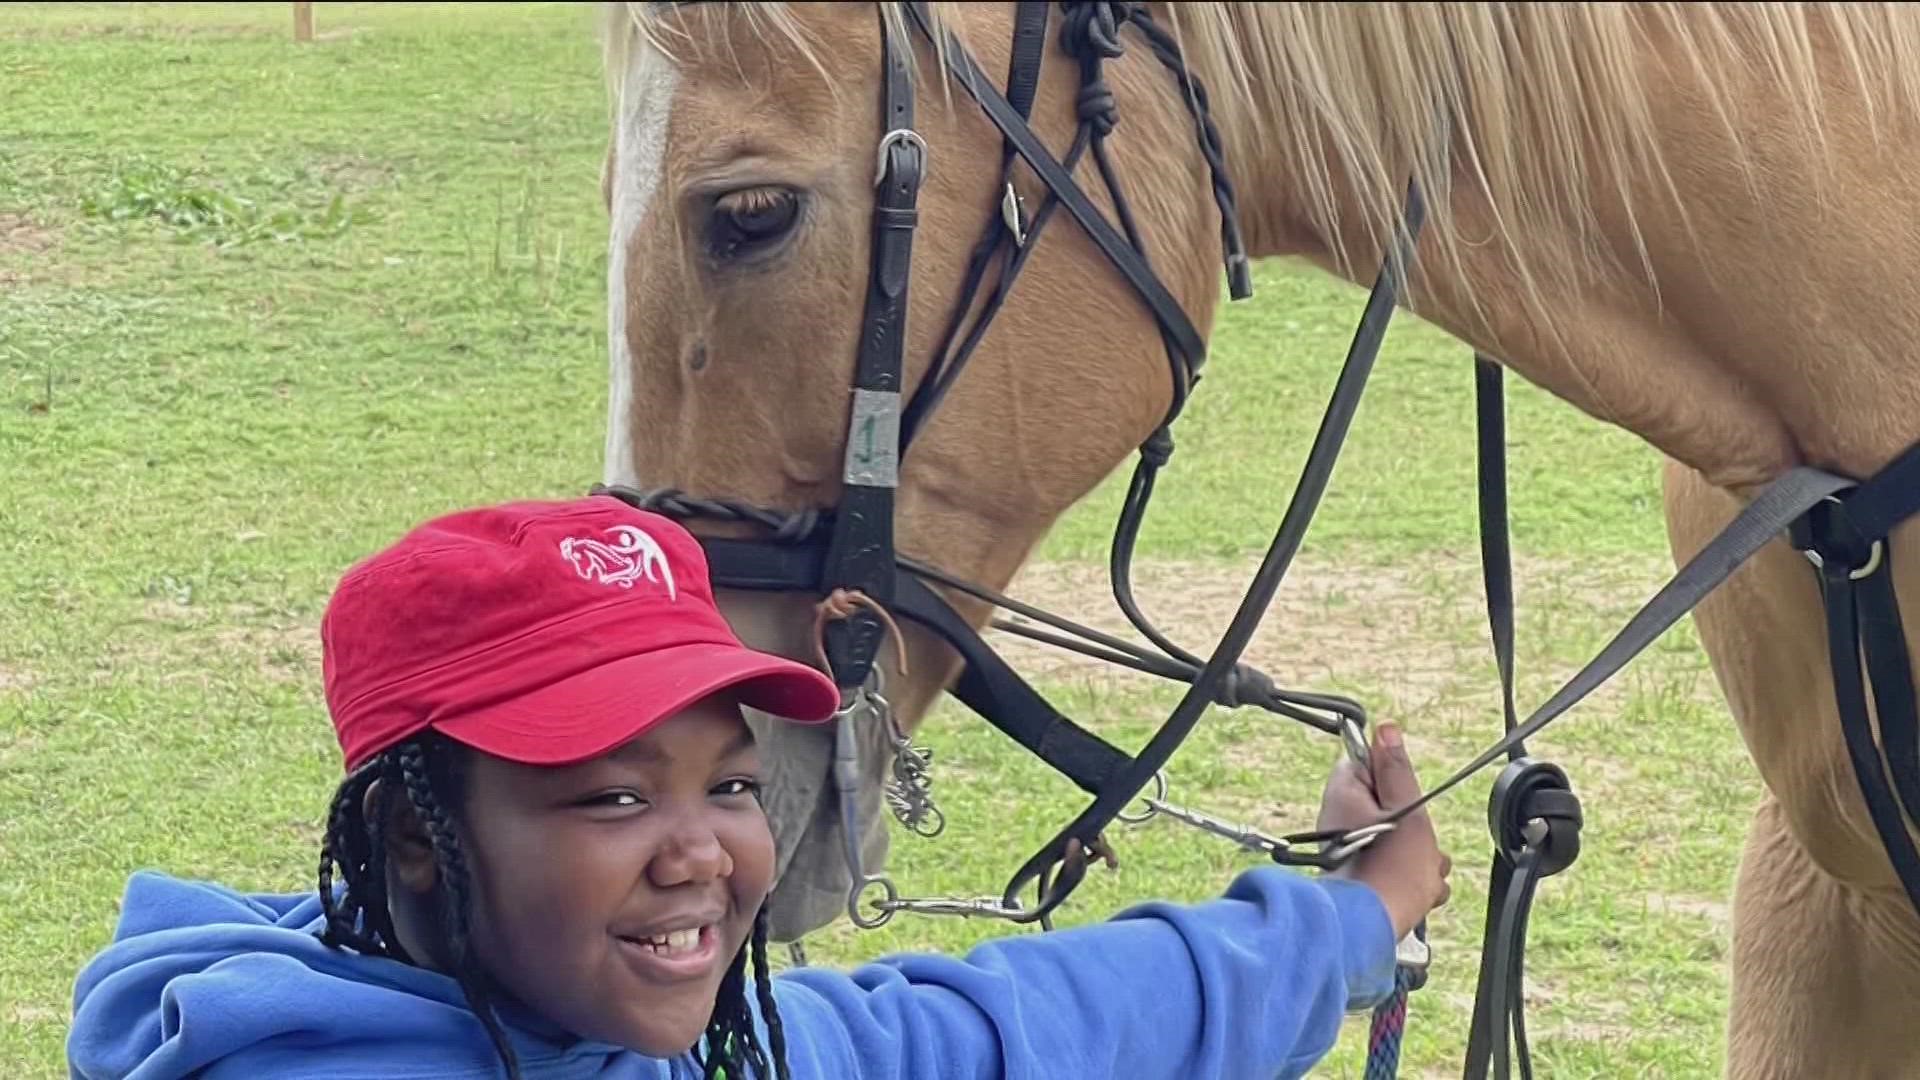 South Fulton Police officers said they don't believe the shooting was random. Sky was a beloved horse at the rance.